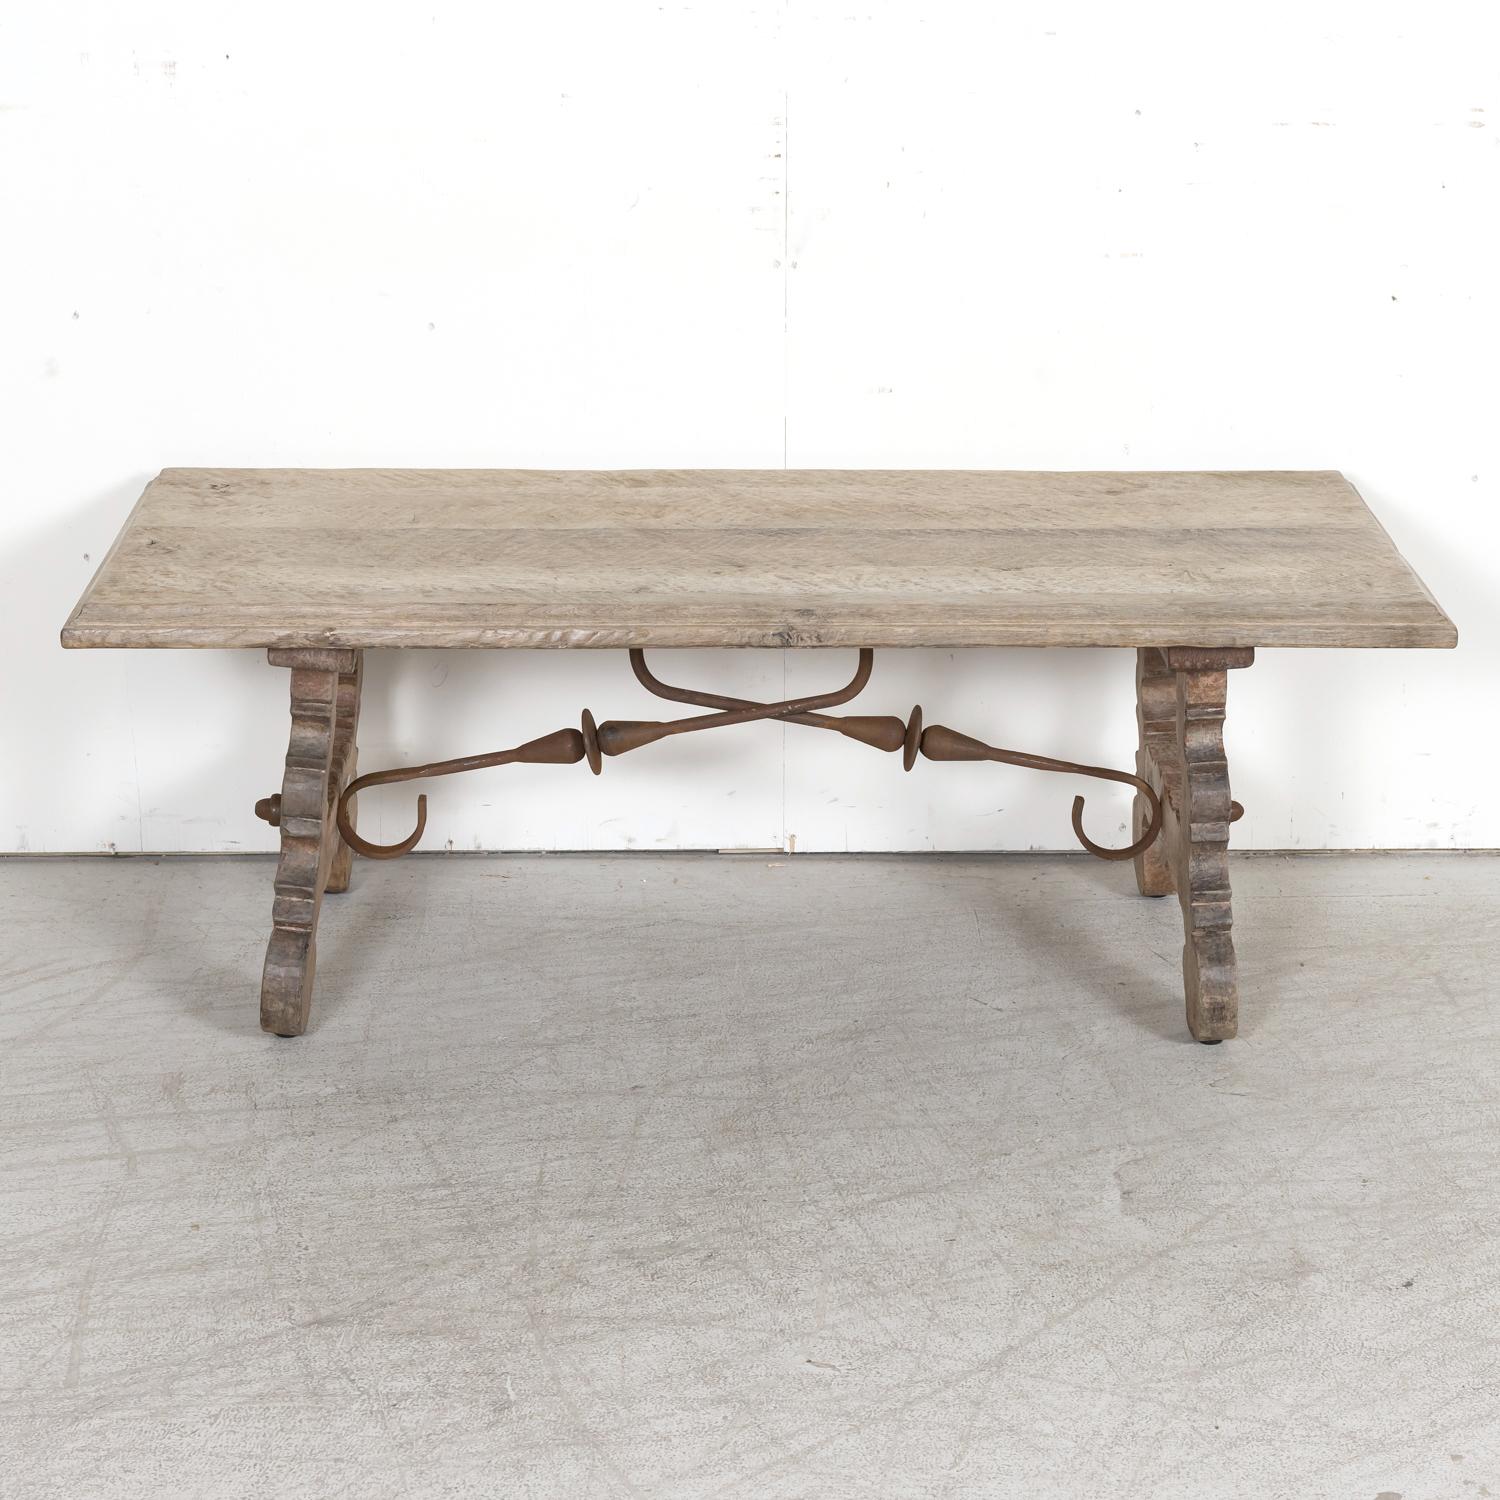 A 19th century Spanish Baroque style coffee table, circa 1880s, from the Catalan region handcrafted of solid oak with a bleached or washed finish and handsome grain pattern. Having a beveled edge plank top resting on carved lyre-shaped legs joined